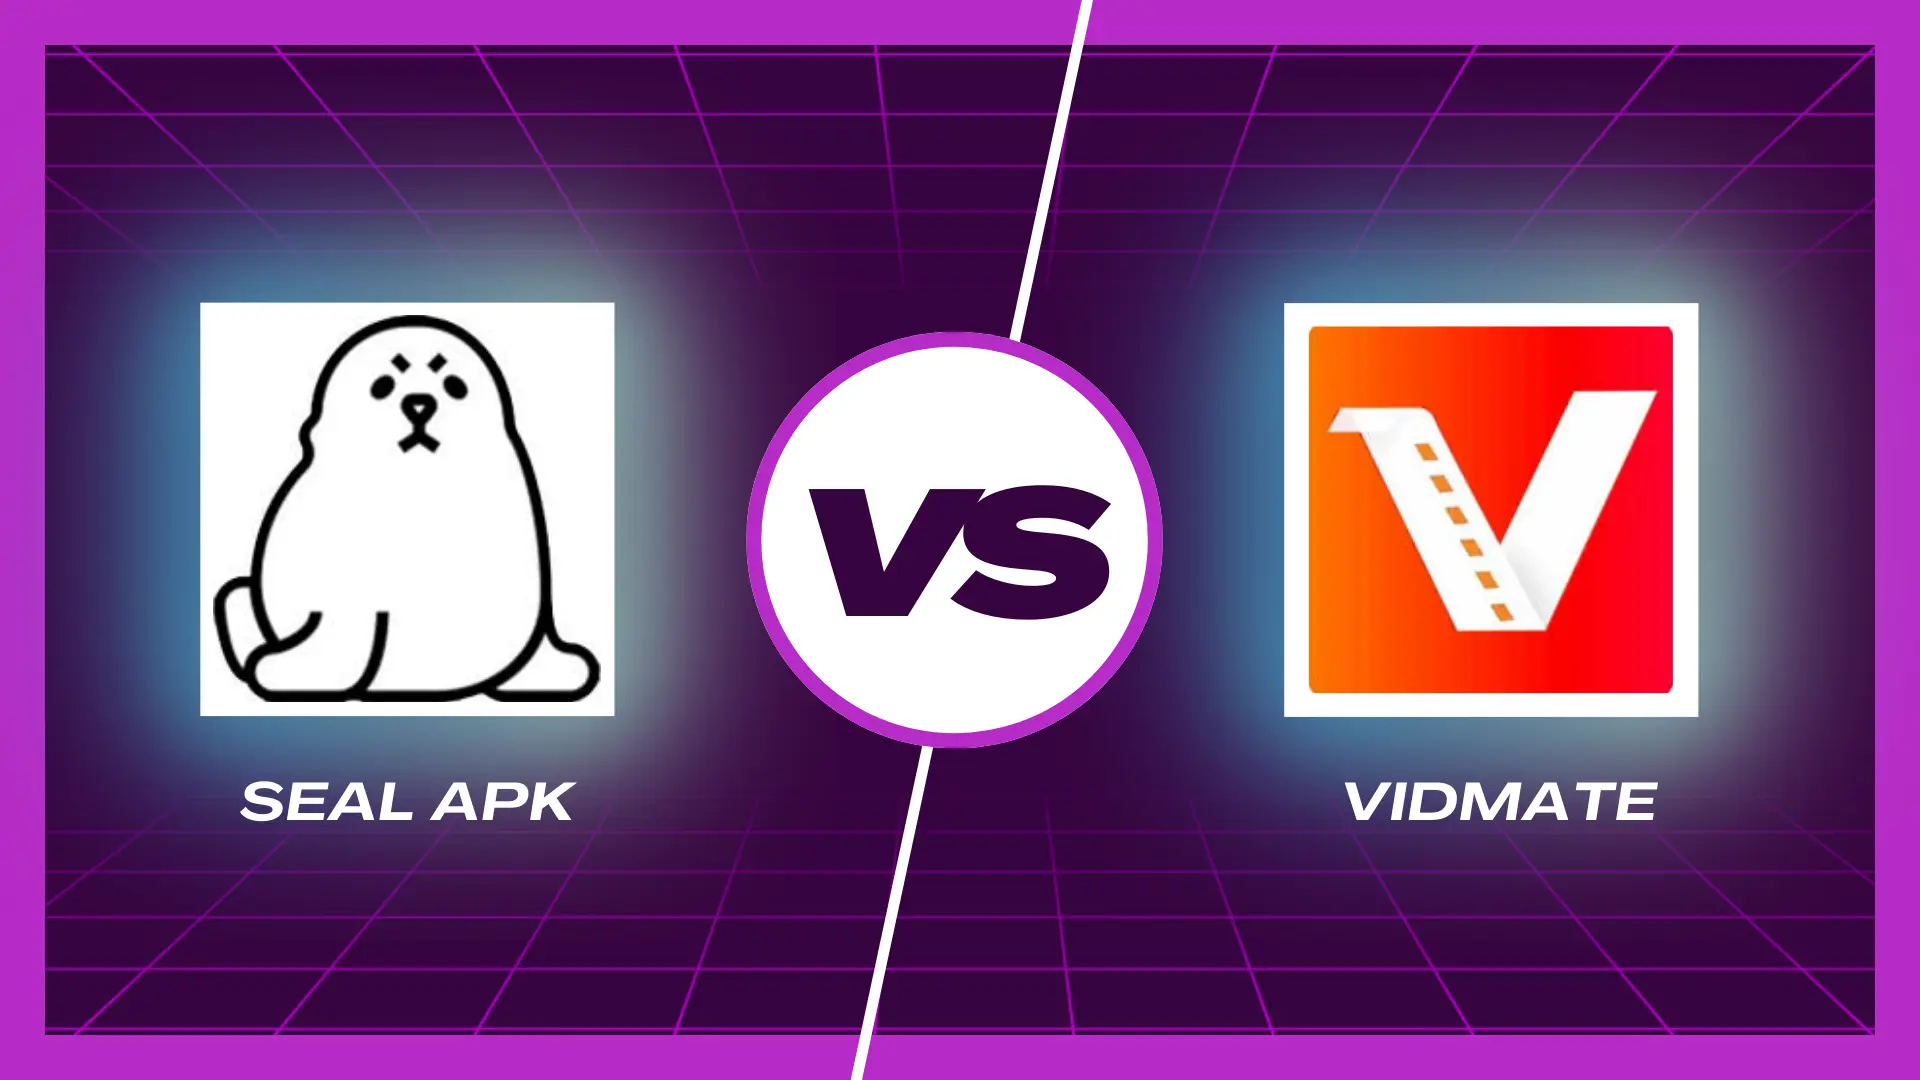 Seal apk comparrision with Vidmate